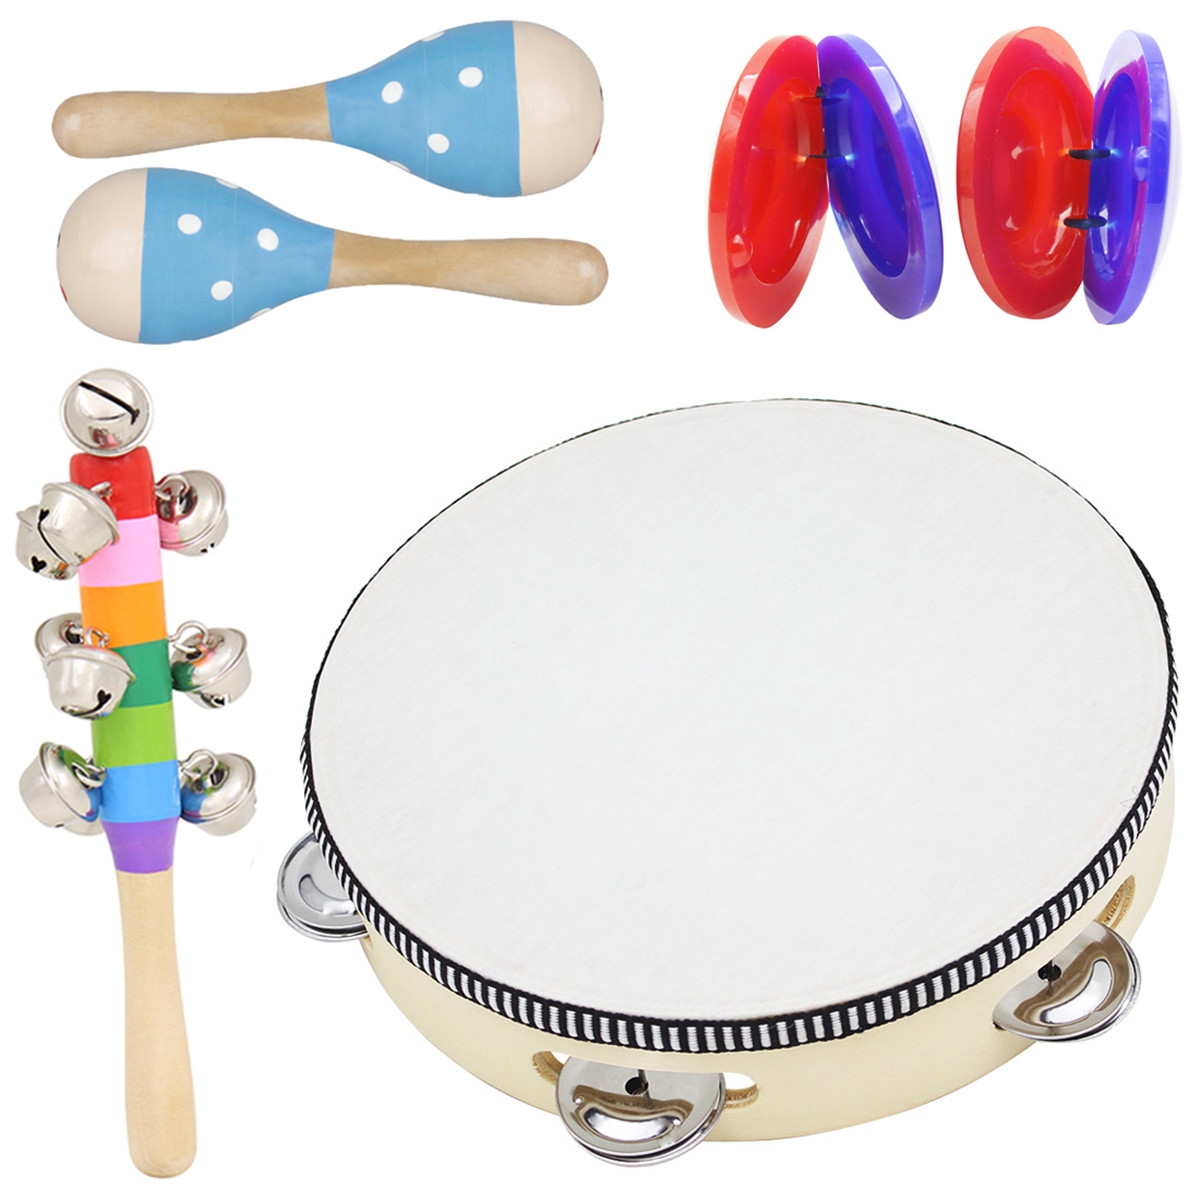 6 Piece Set Orff Musical Instruments Hand Shake Rattle Castanets Sand Hammer Vertical Bell Educational Tools Rhythm Kit for Kids Toddlers